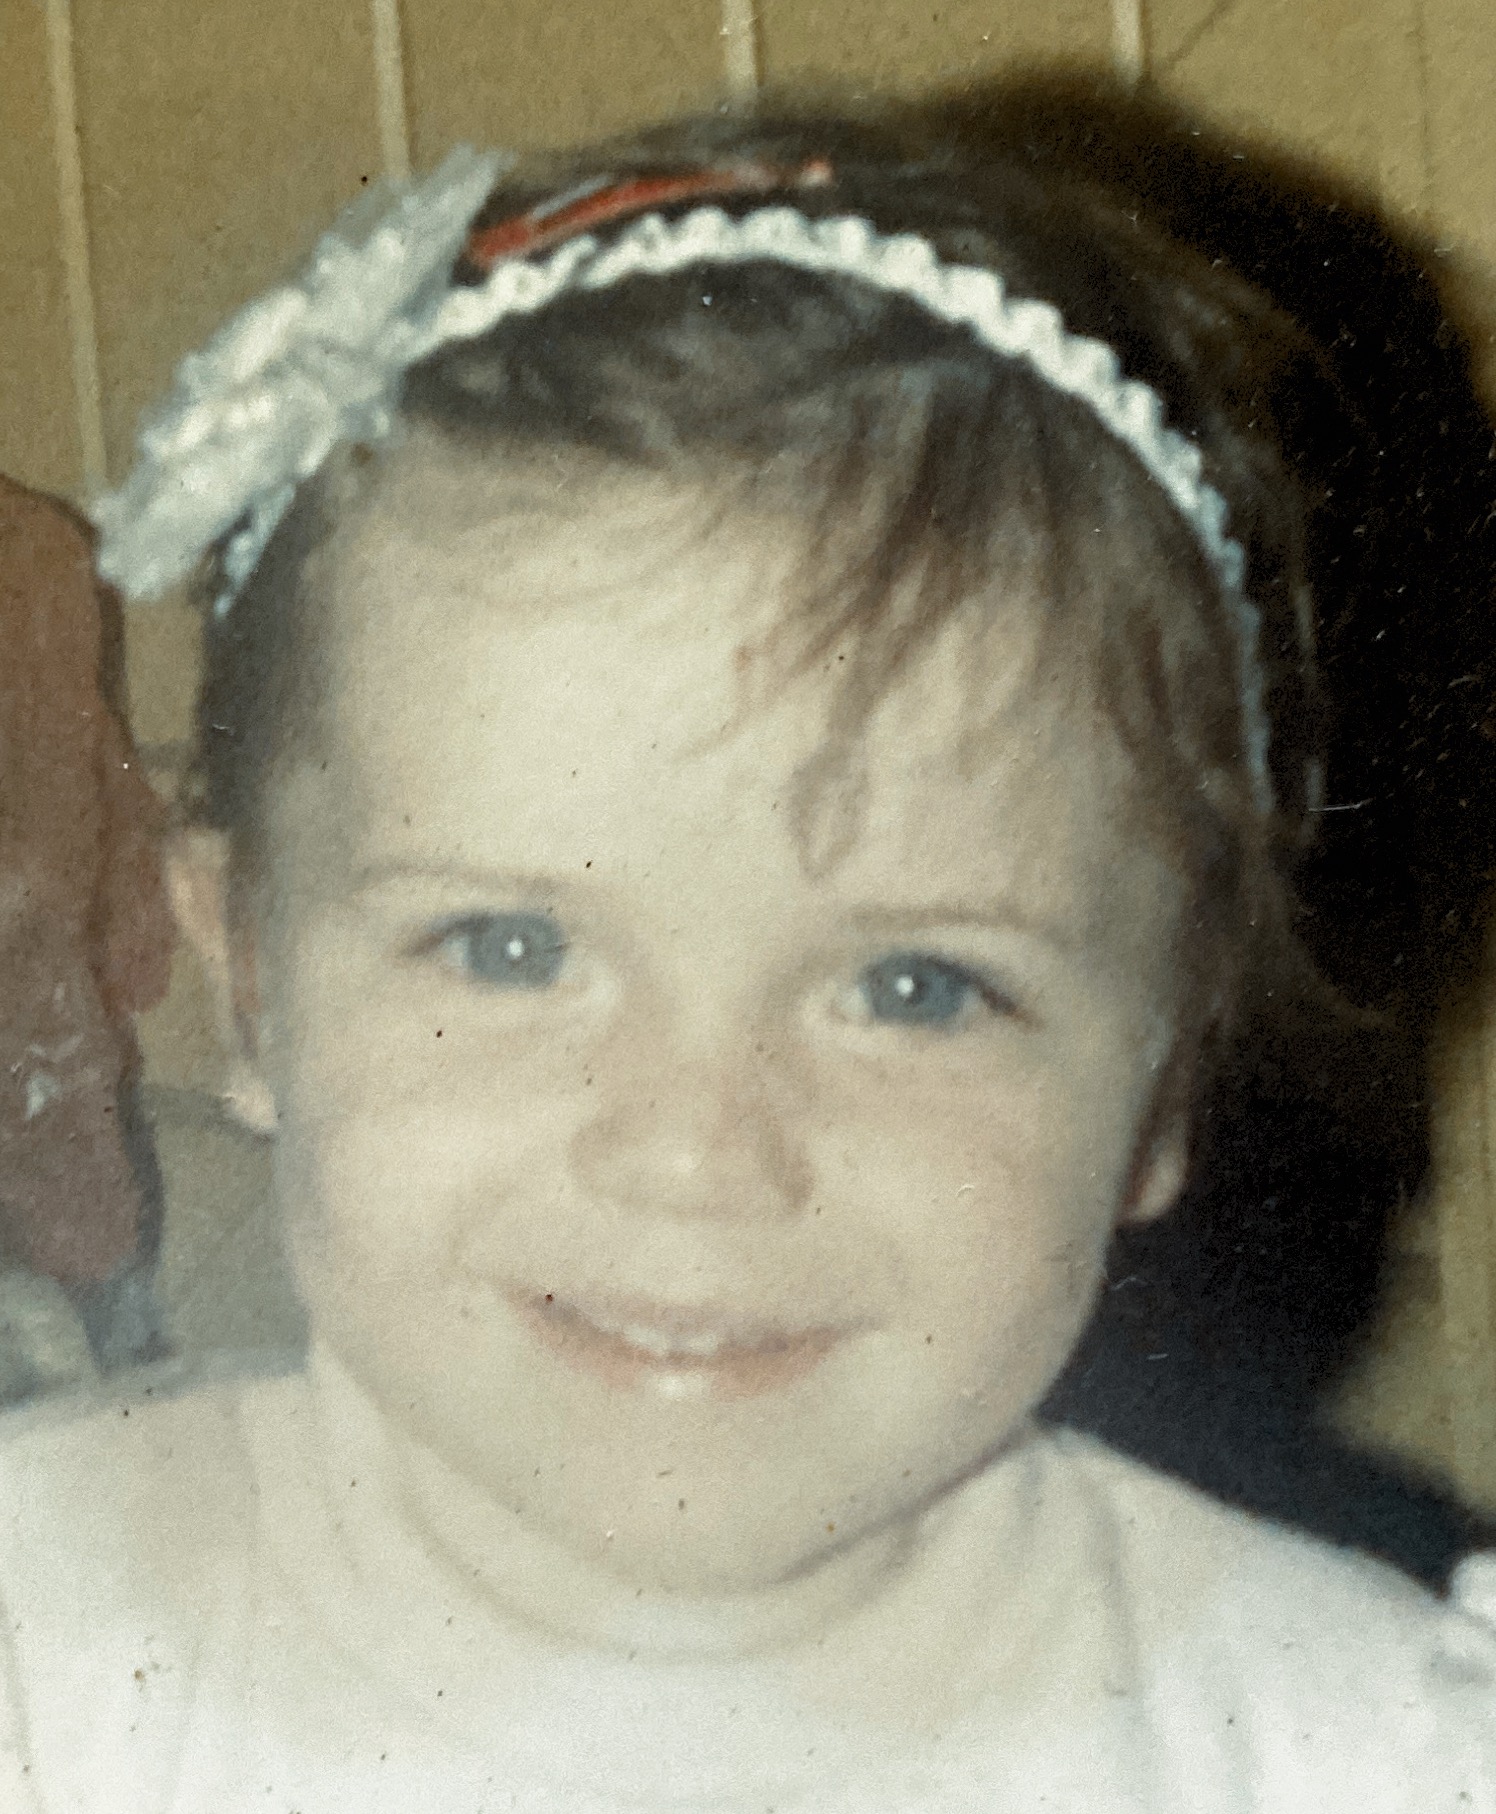 Marcia Louise Short
2 years old